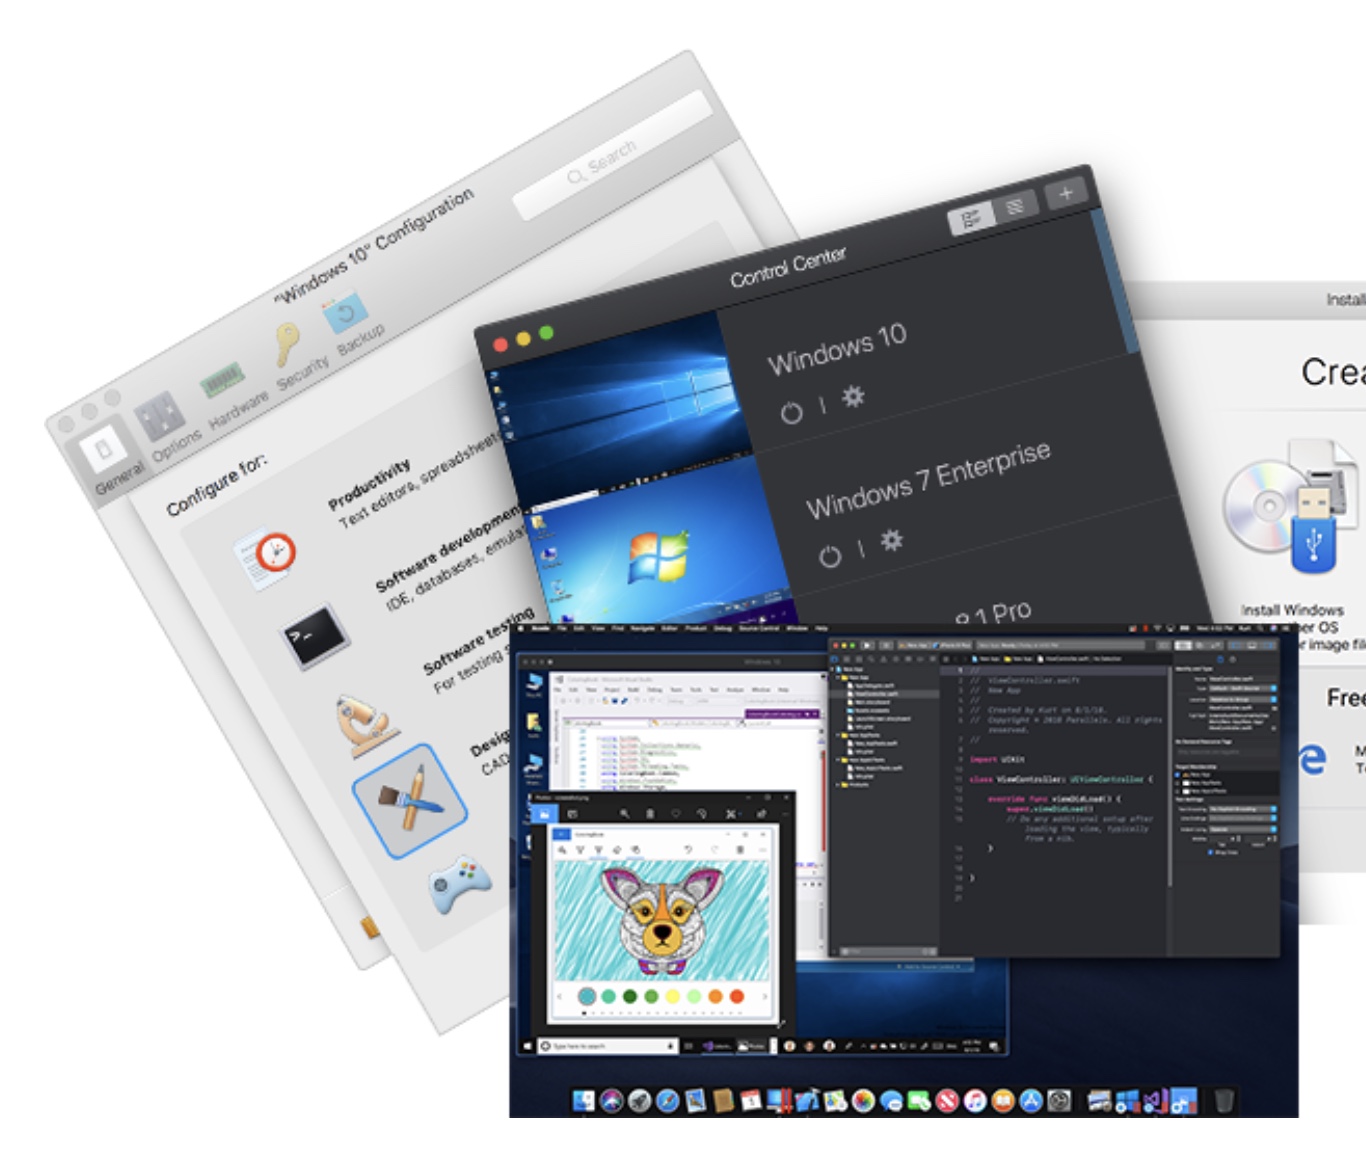 Parallels 14 adds support for macOS Mojave